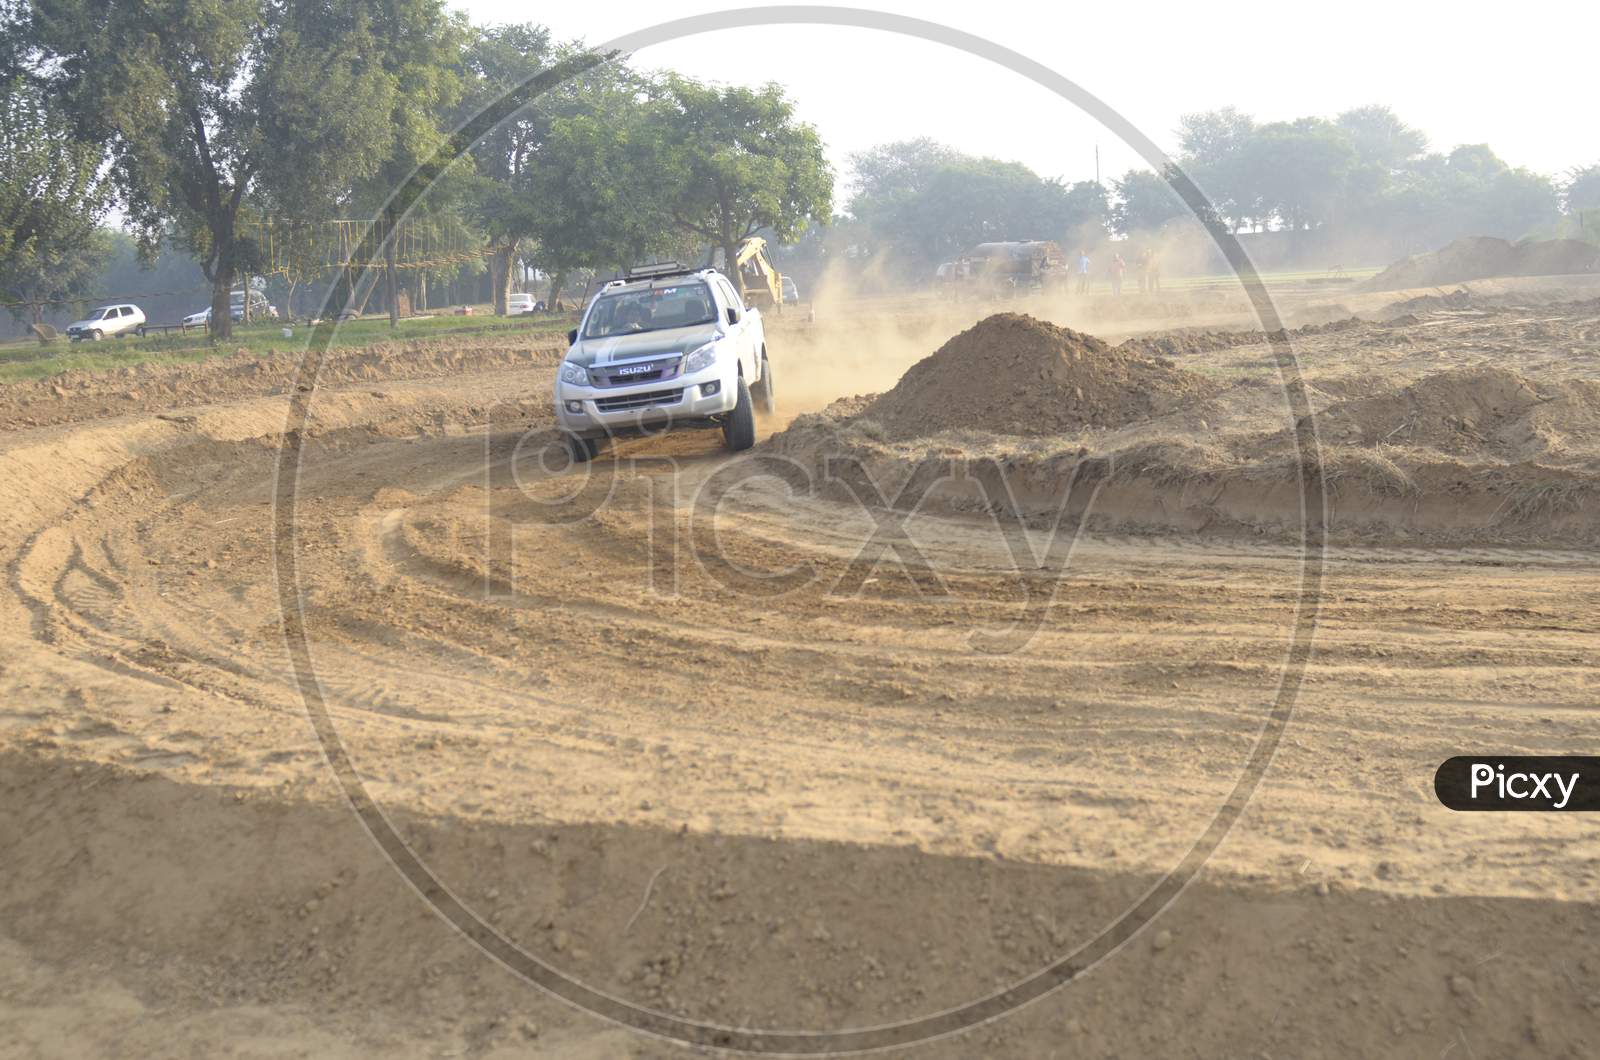 ISUZU Car Or  Off-Road Vehicle  in an Rally Championship  With Drifting And Sand and Soil  Splashes on Rally Tracks